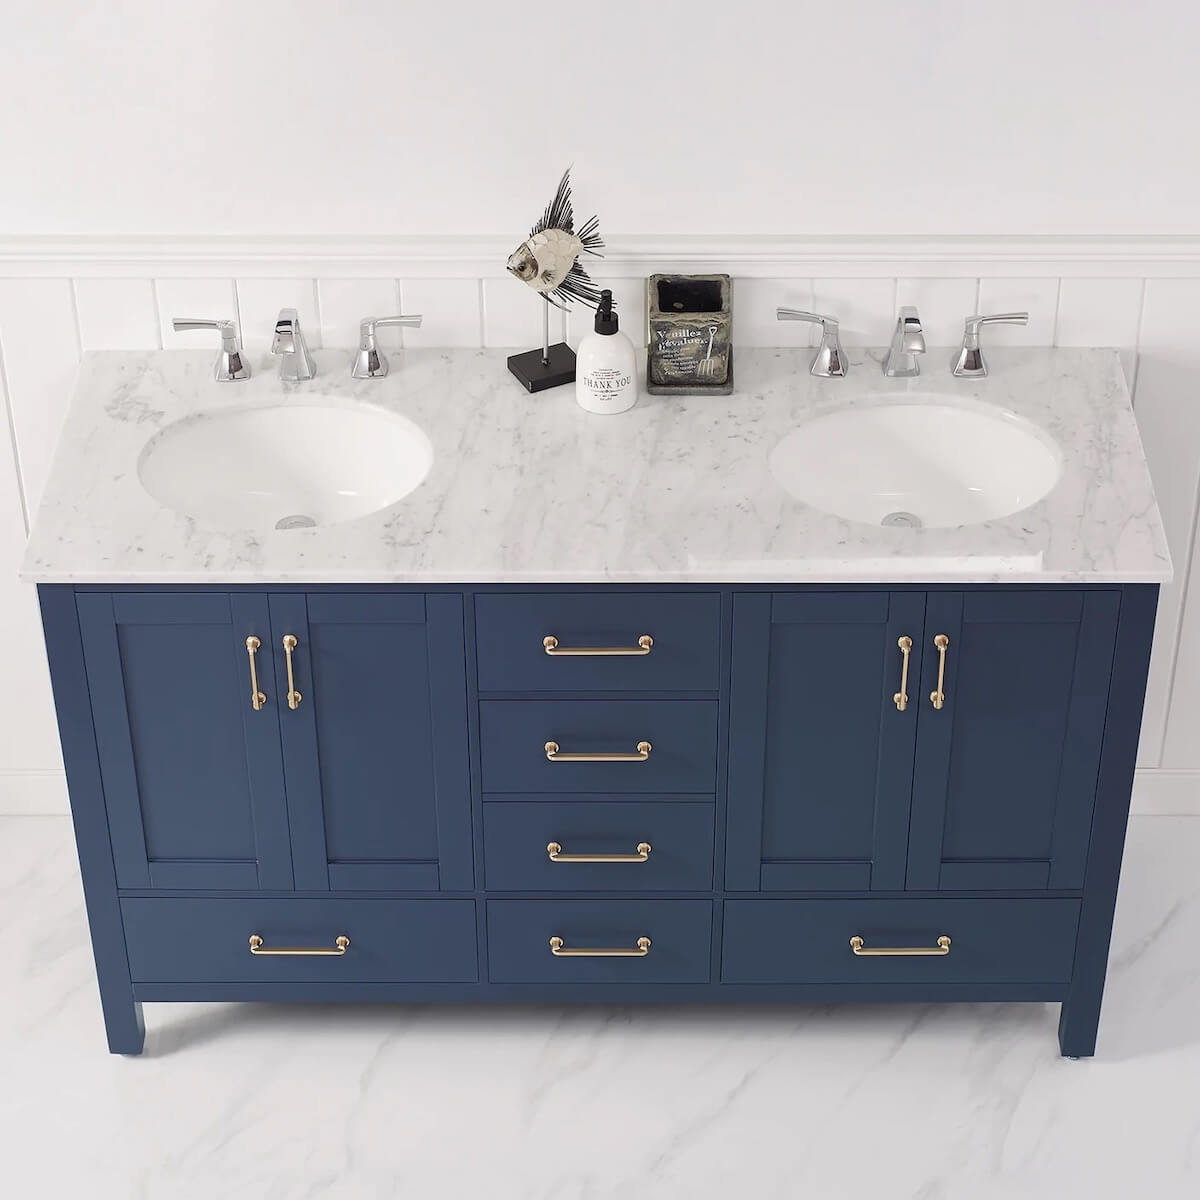 Vinnova 60” Gela Royal Blue Double Vanity with Carrara White Marble Countertop Without Mirror Counter 723060-RB-CA-NM